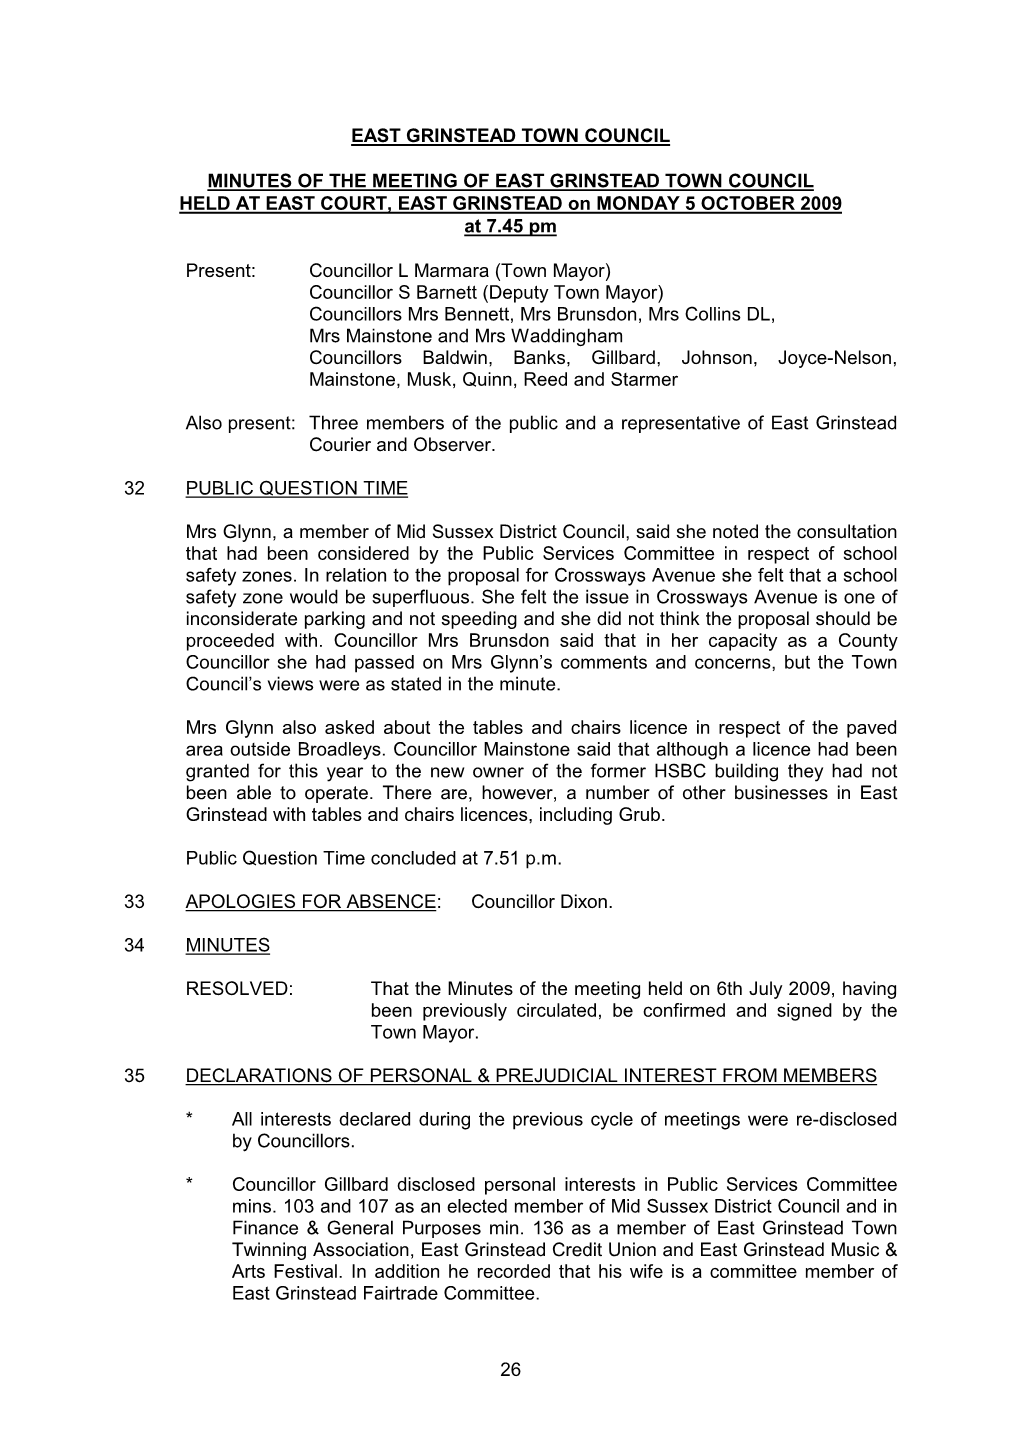 26 East Grinstead Town Council Minutes of The